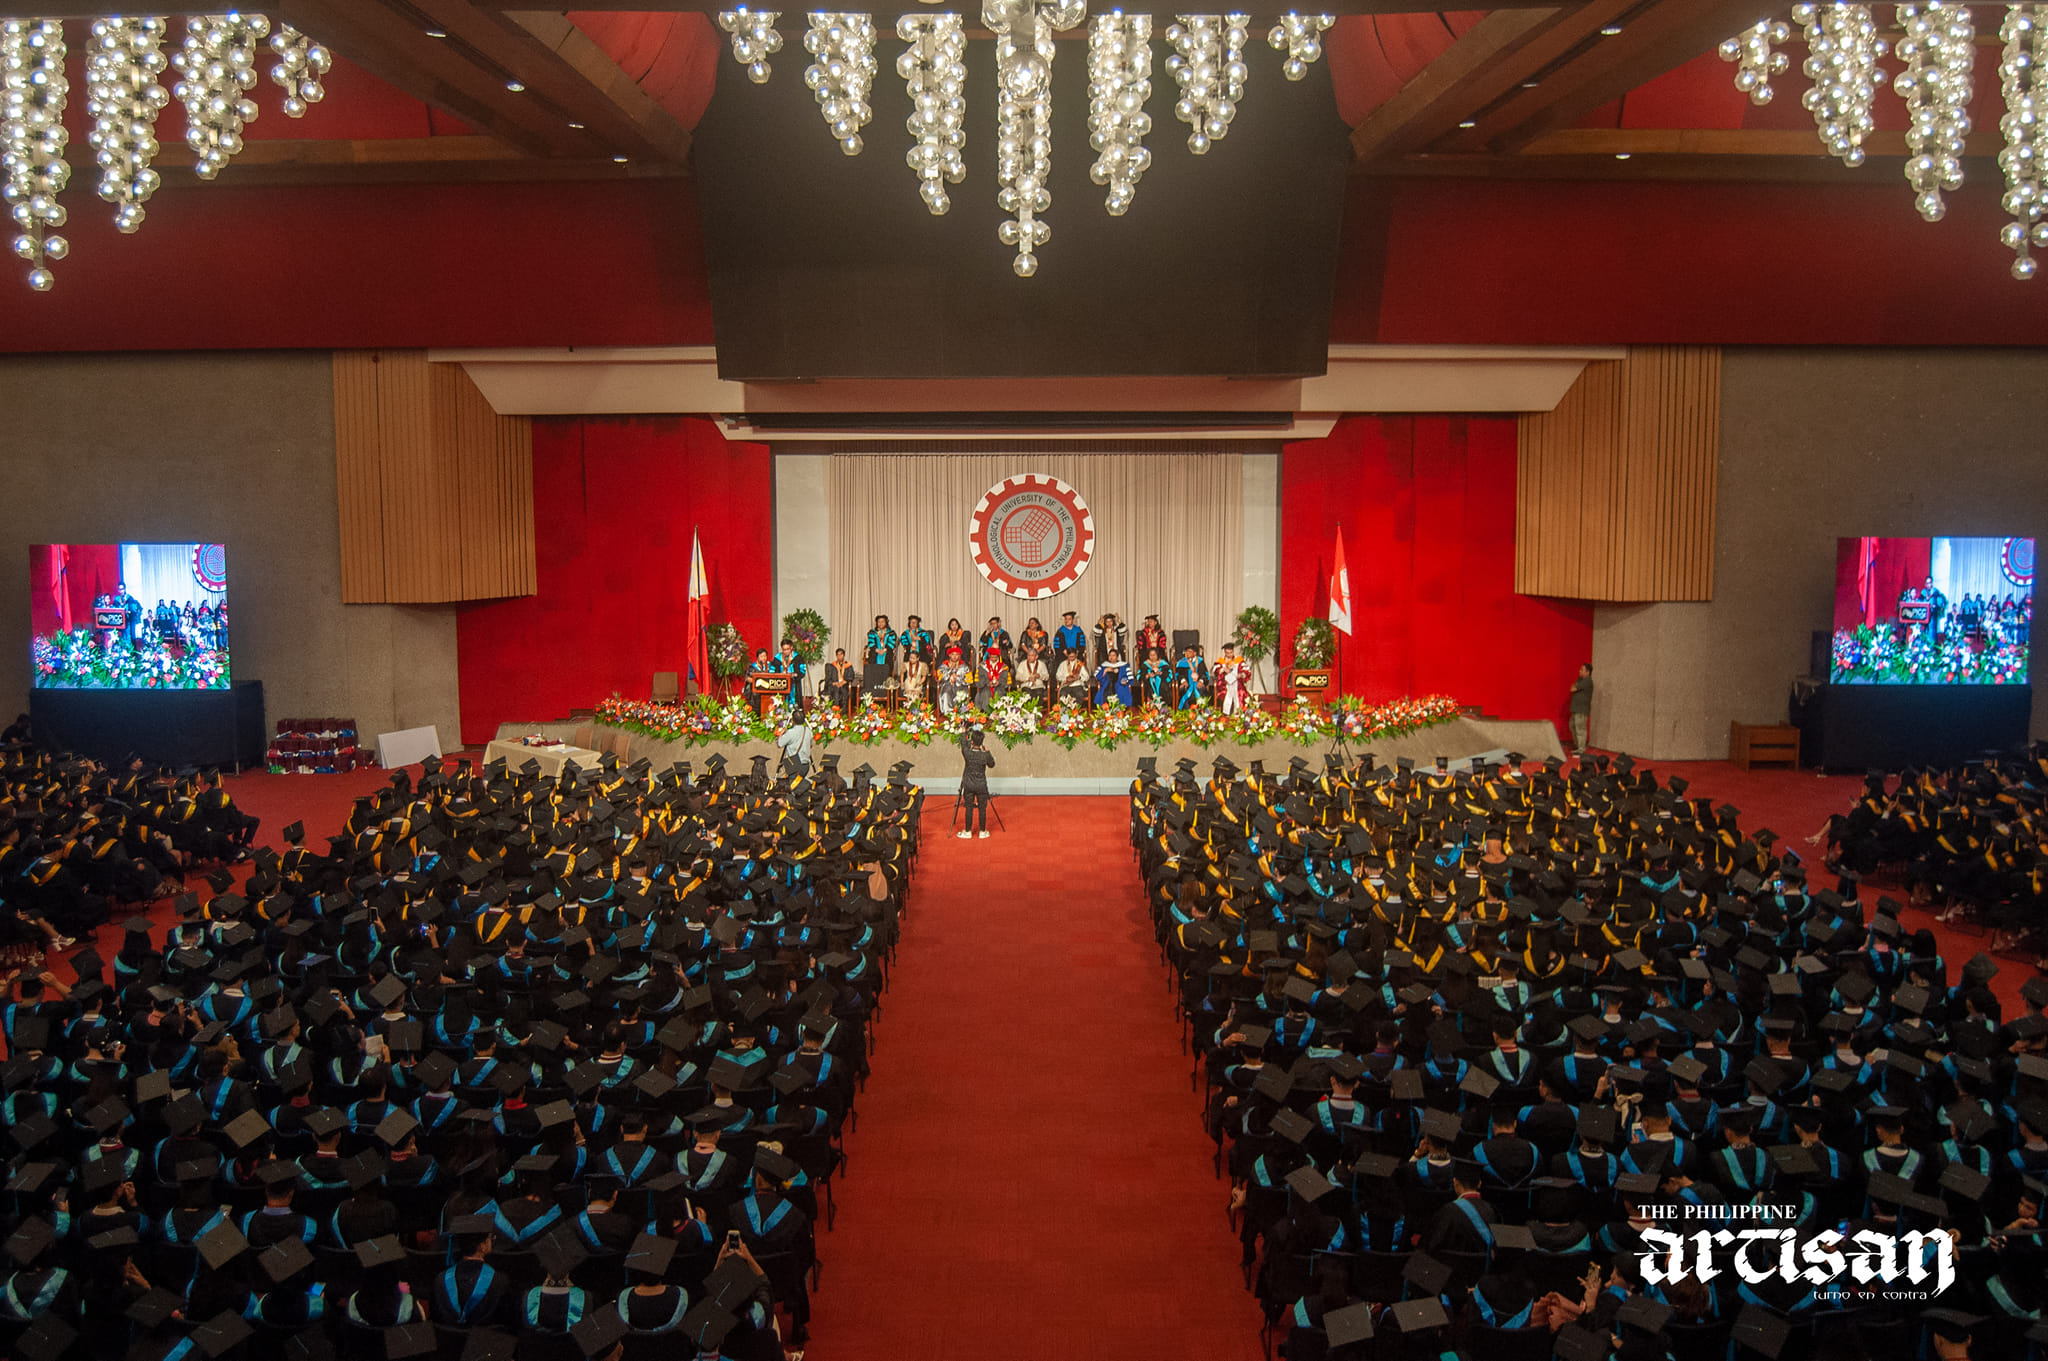 118th Commencement Exercise at the Philippine International Convention Center (PICC)